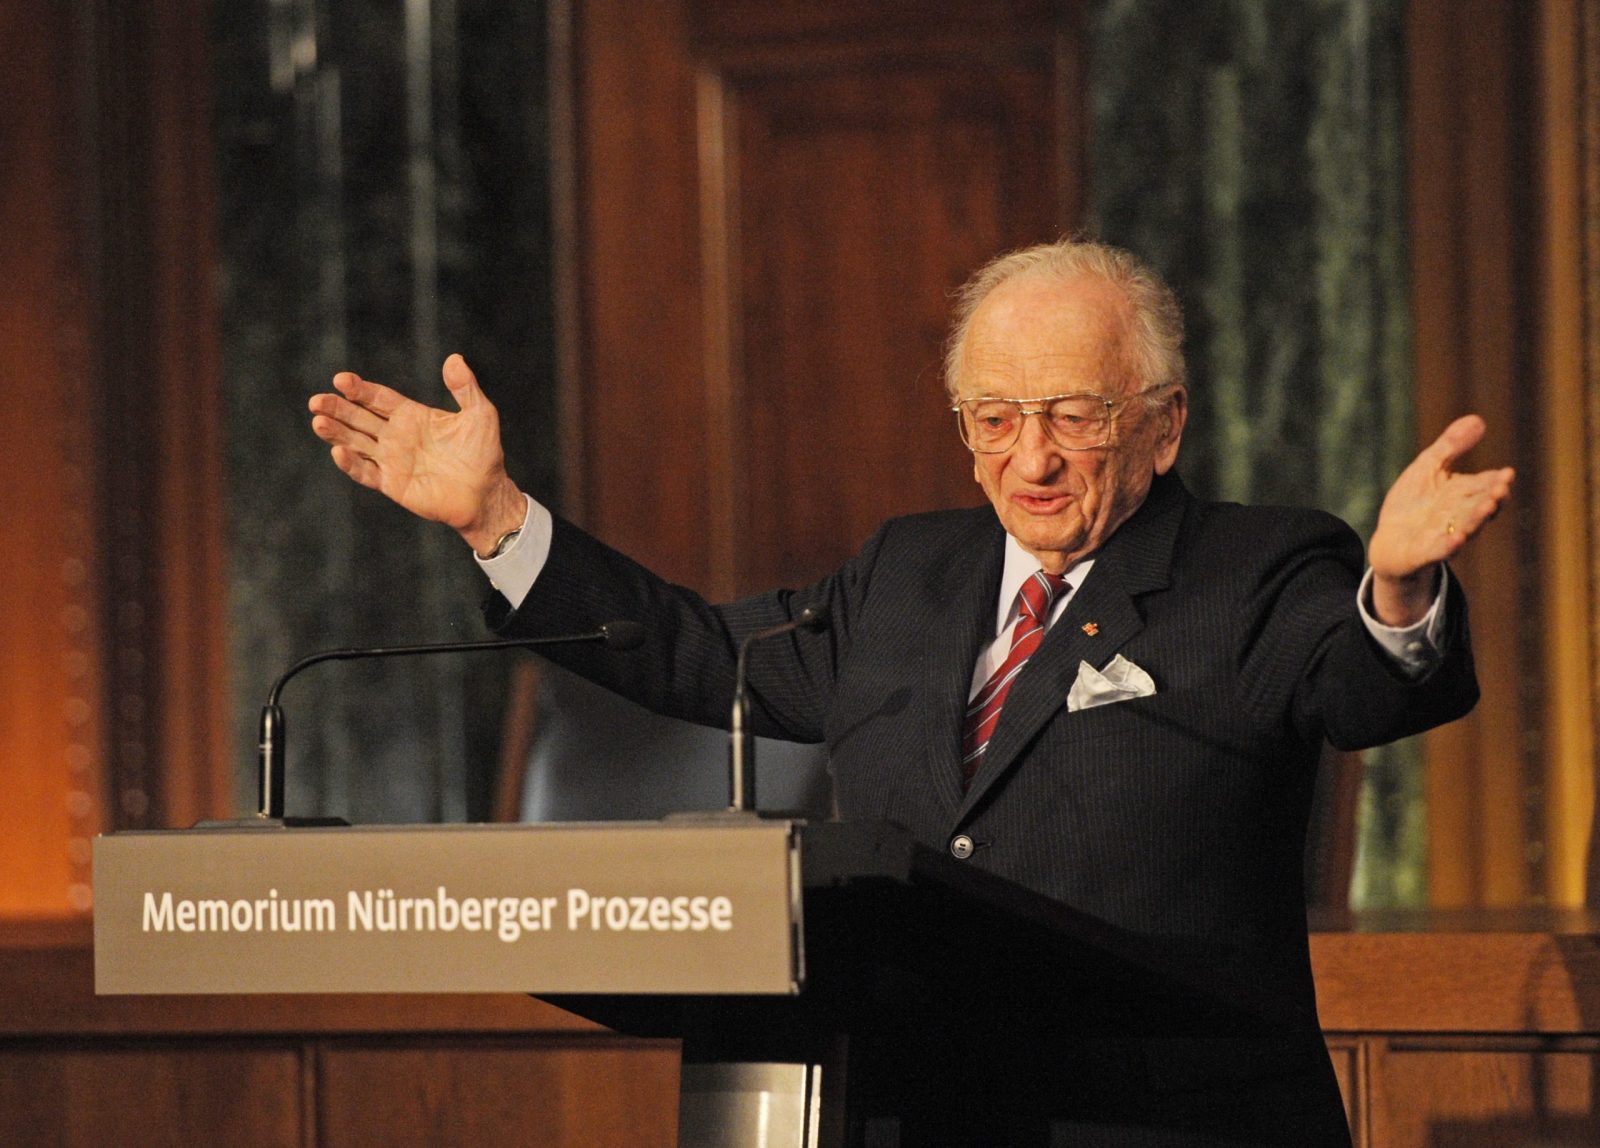 epa10565976 (FILE) - Former chief prosecutor of the Einsatzgruppen Trial Benjamin Ferencz speaks at the opening of the 'Nuremberg Trials Memorium' at the regional court Nuremberg-Fuerth in Nuremberg, Germany, 21 November 2010 (reissued 09 April 2023). Ferencz, the last surviving Nuerenberg prosecutor, died on the night of 07 April in Florida aged 103, the US Holocaust Museum confirmed on 08 April.  EPA/ARMINA WEIGEL  GERMANY OUT *** Local Caption *** 02459446